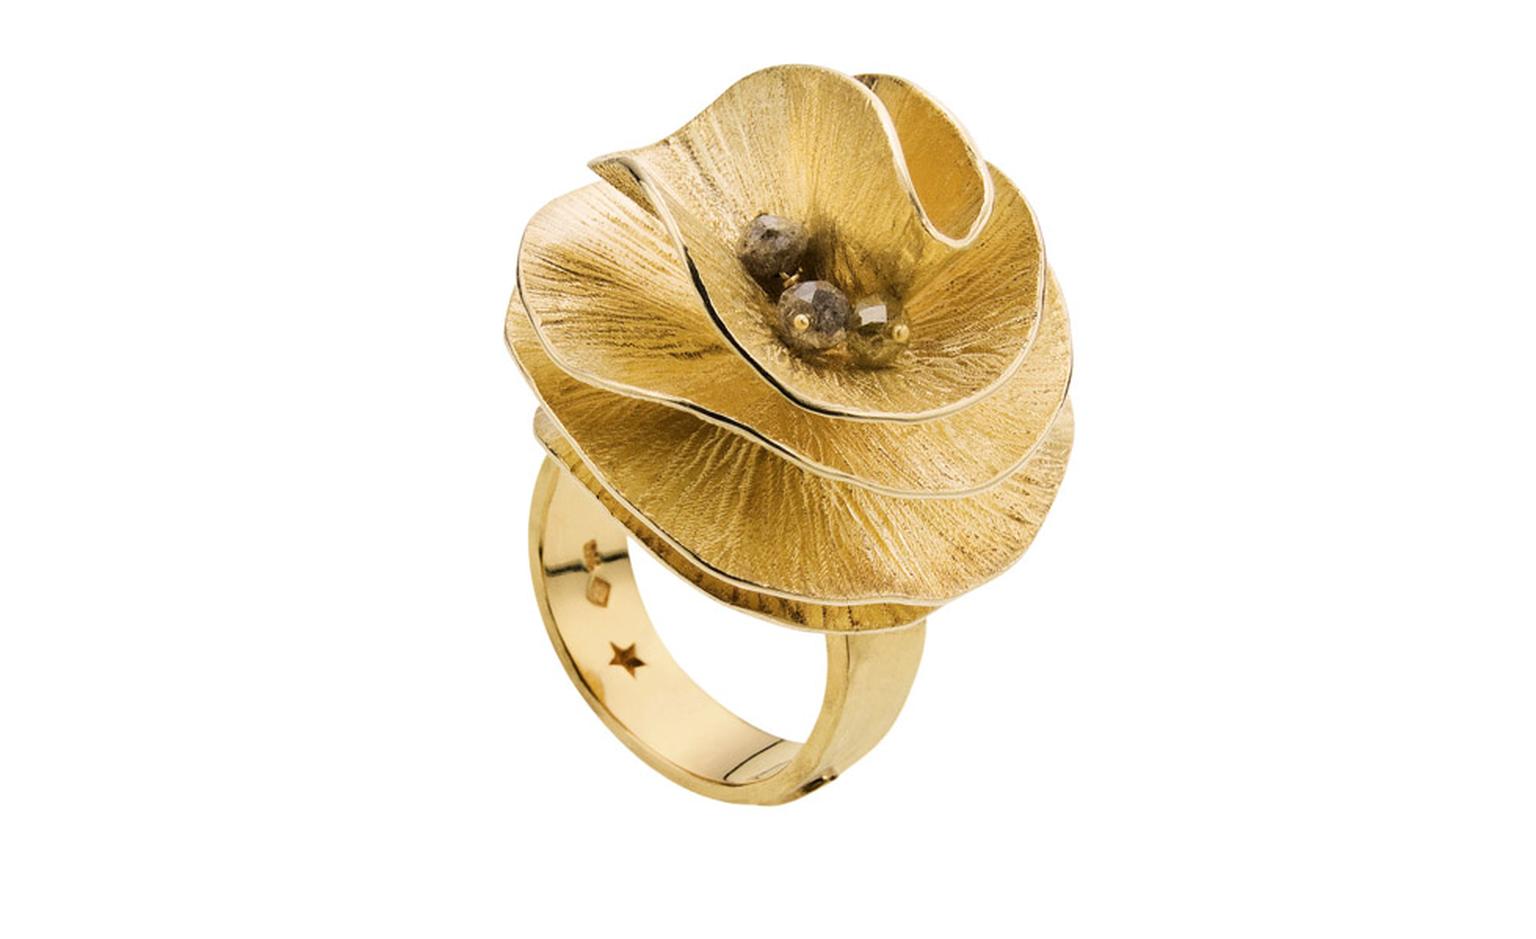 H STERN BALLET DU CORPO, G 21 ring in yellow gold and cognac diamond. £3, 200